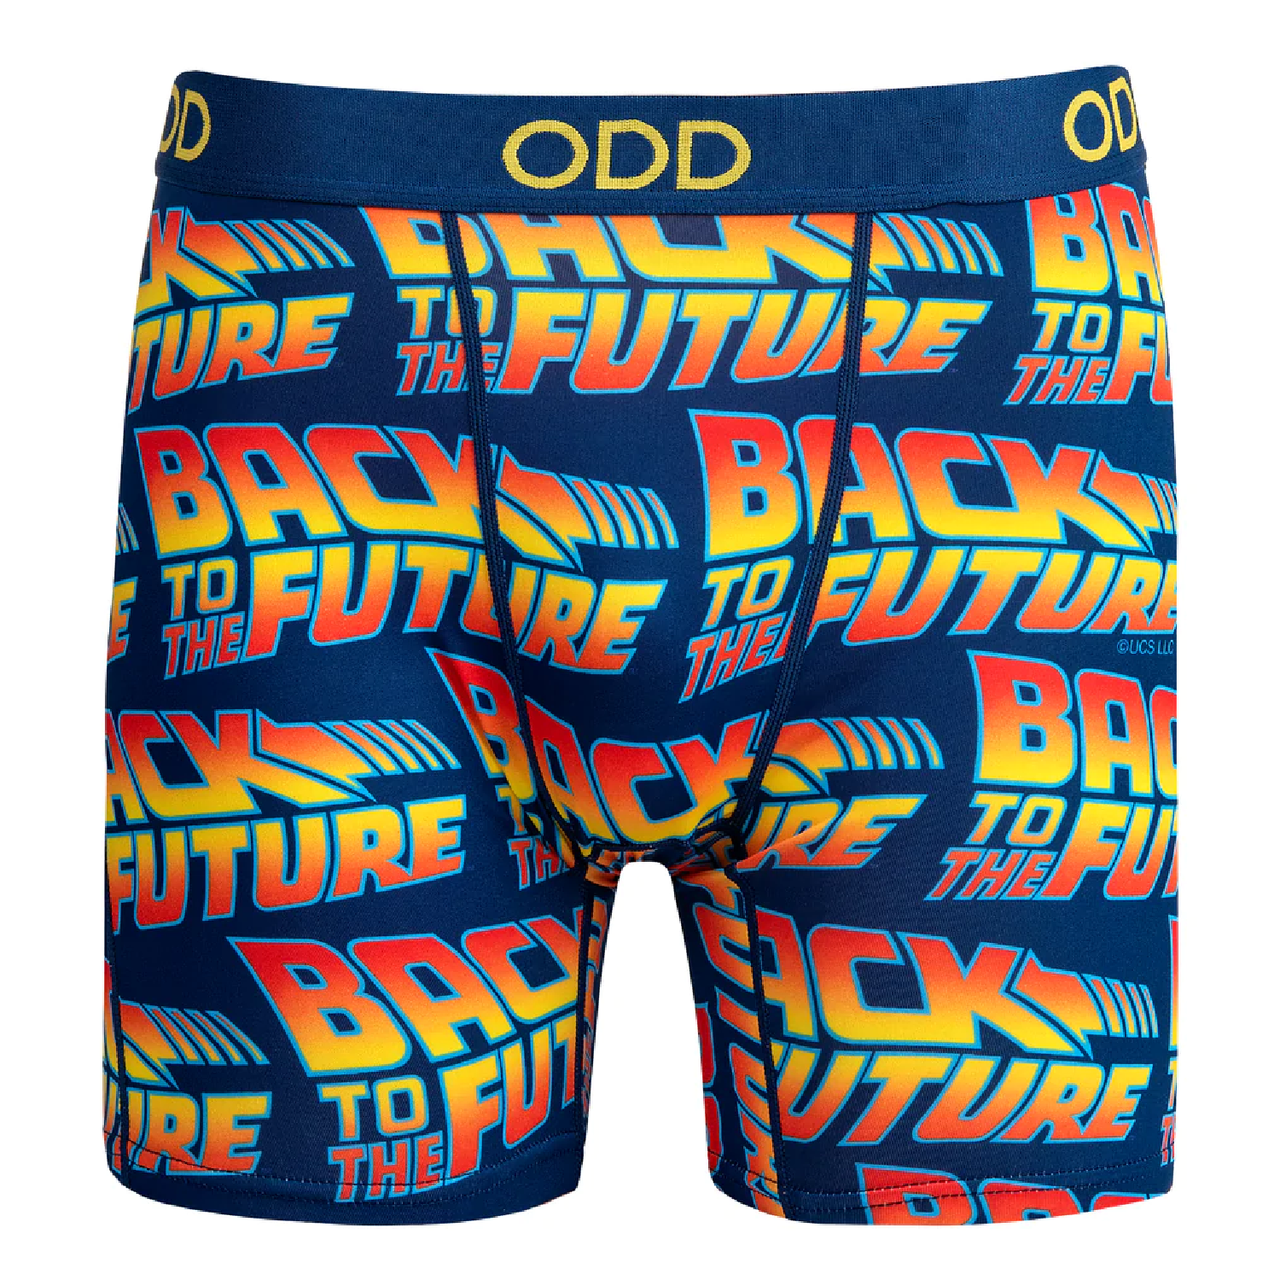 Back To The Future Boxer Briefs by Odd Sox 